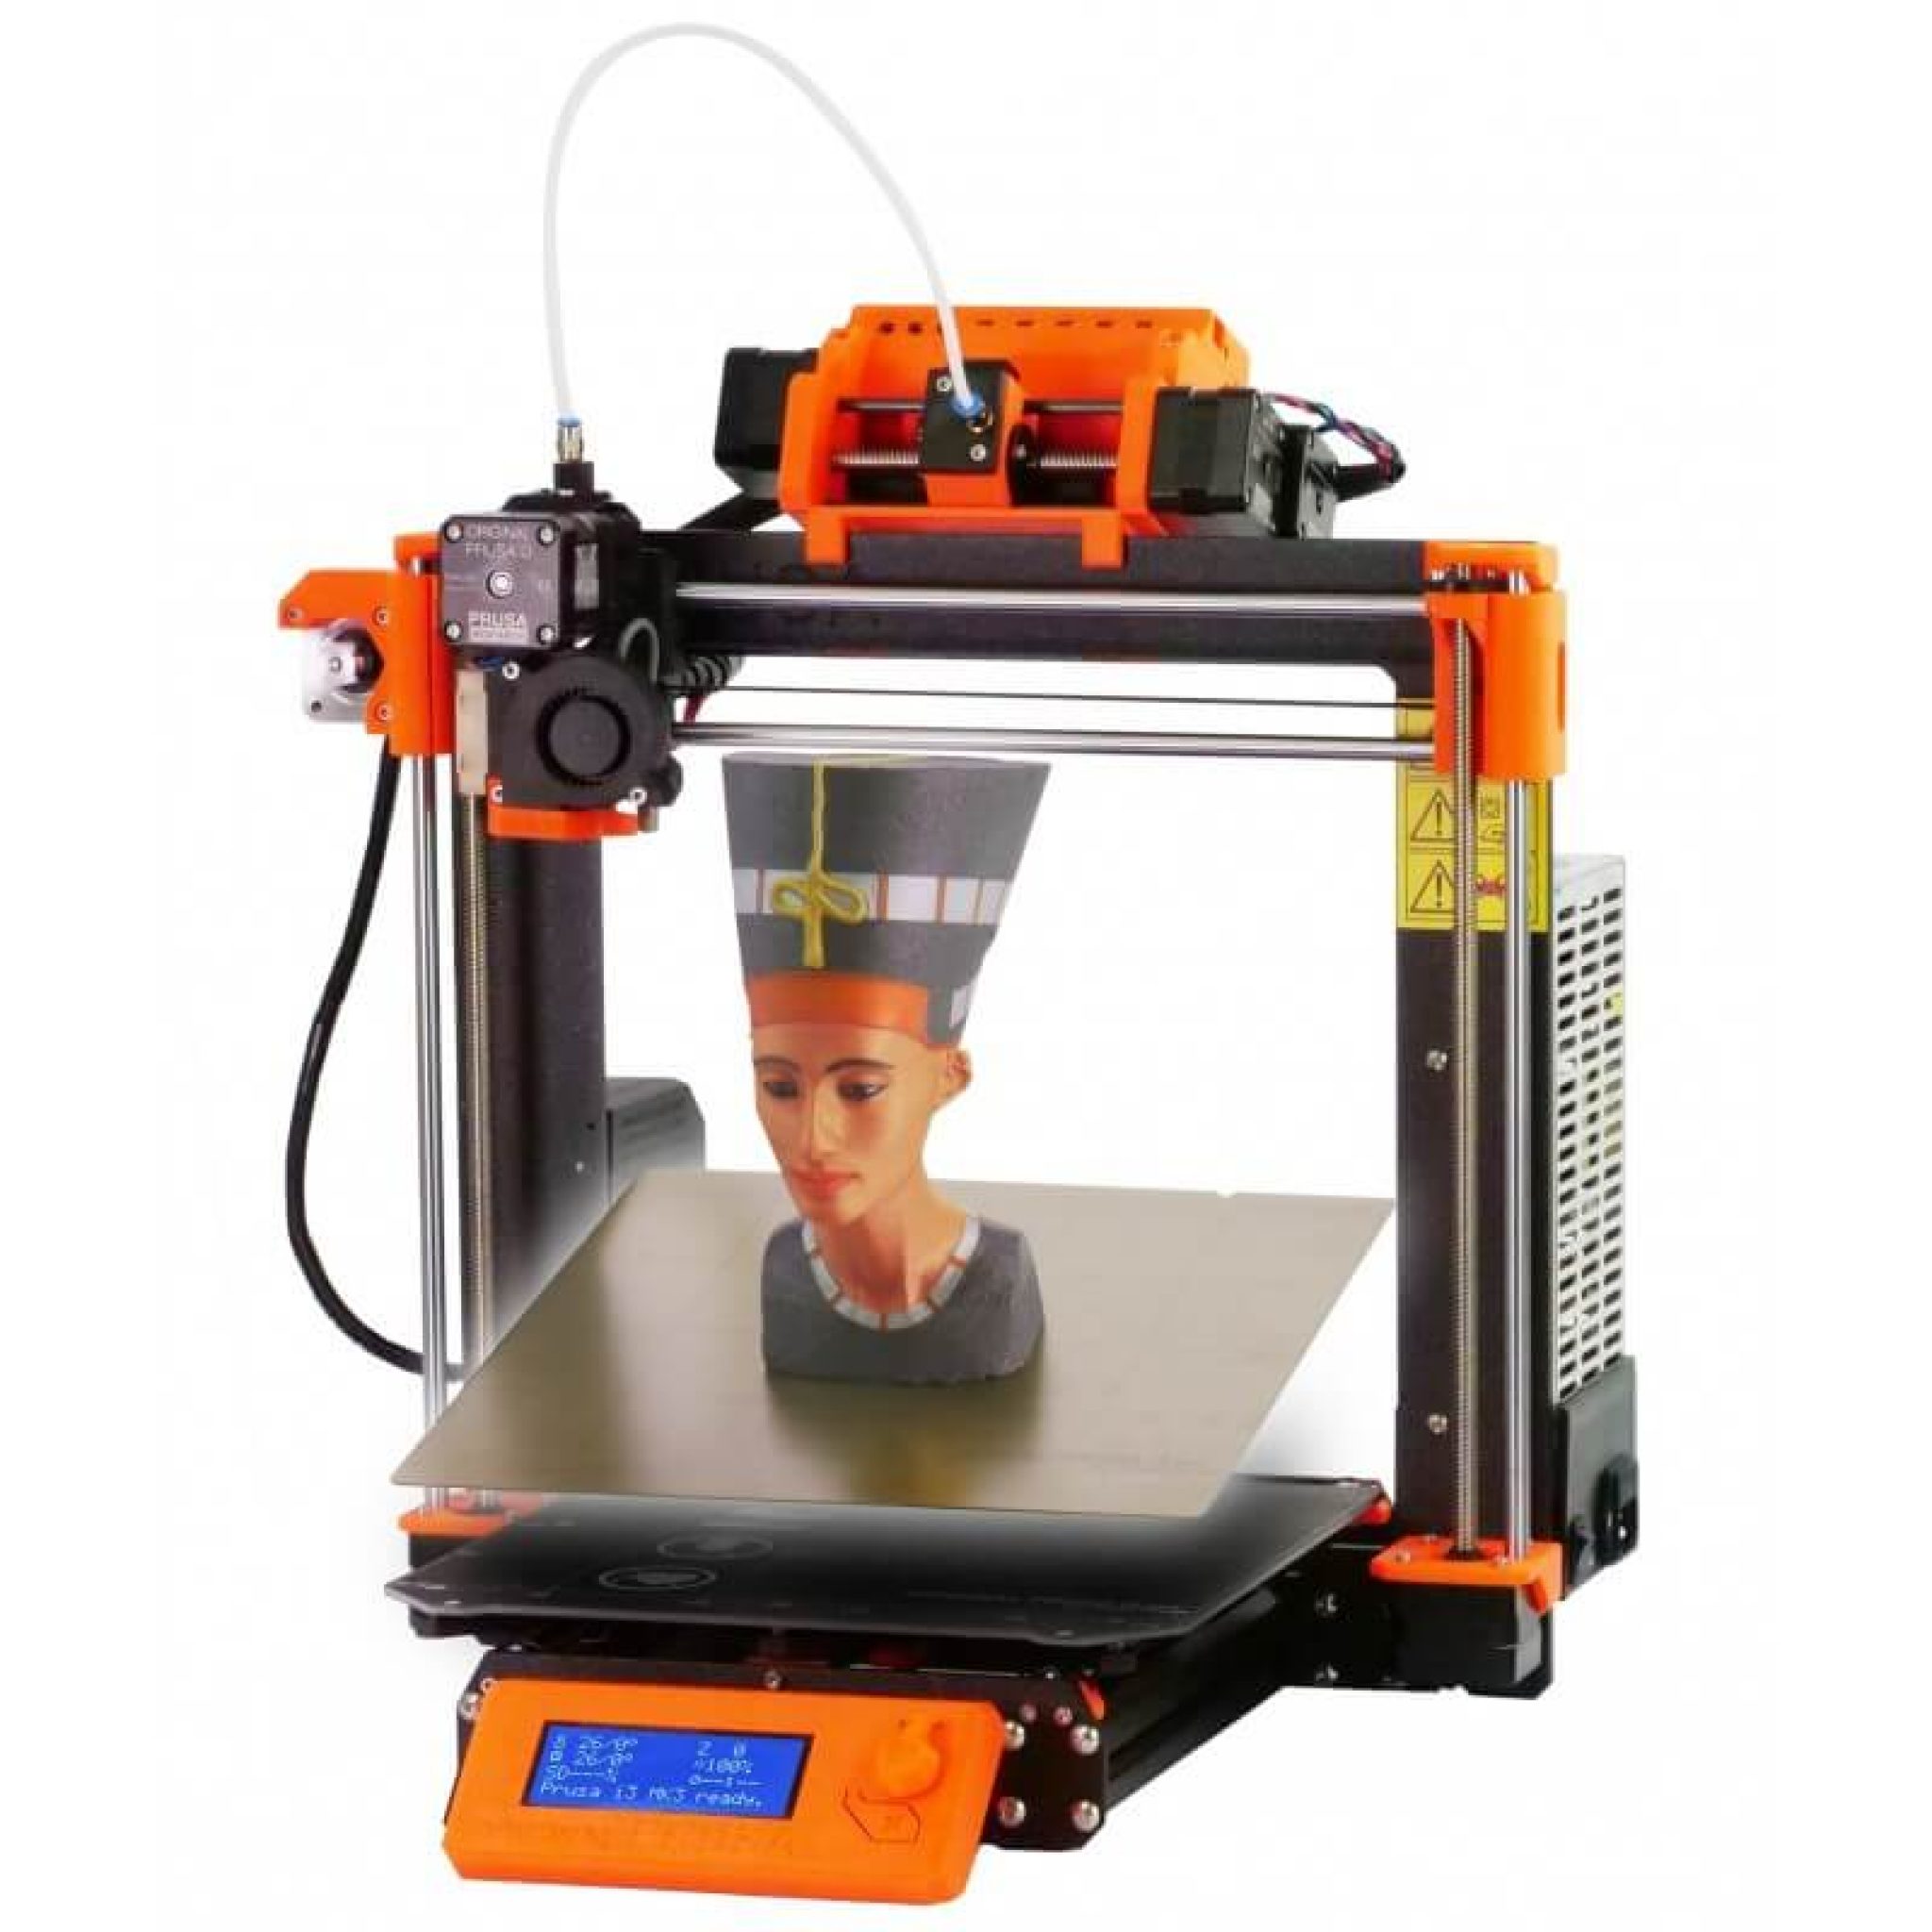 2021 Best 3D Printer Plastic Types, Uses And Buying Guide Pick 3D